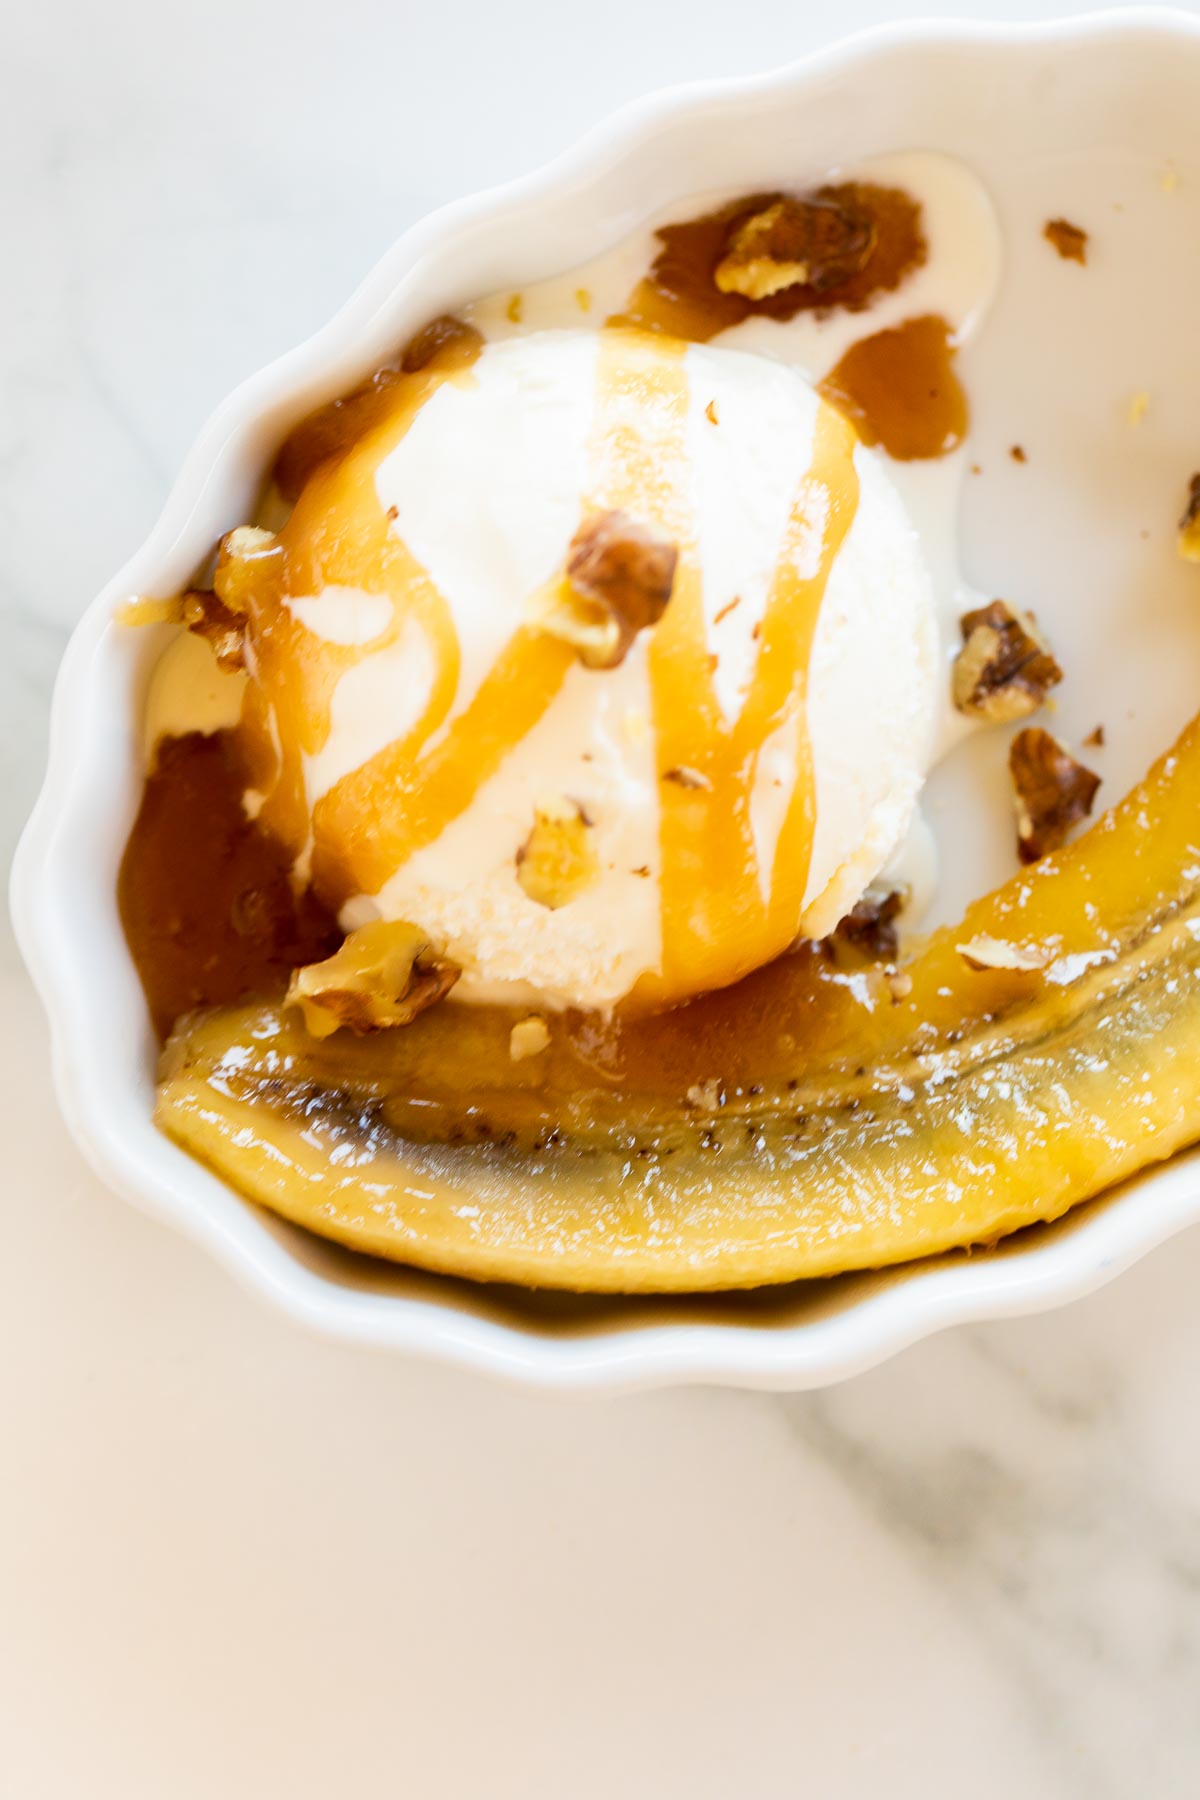 A bowl of ice cream with a banana and caramel sauce, inspired by the classic bananas foster recipe.